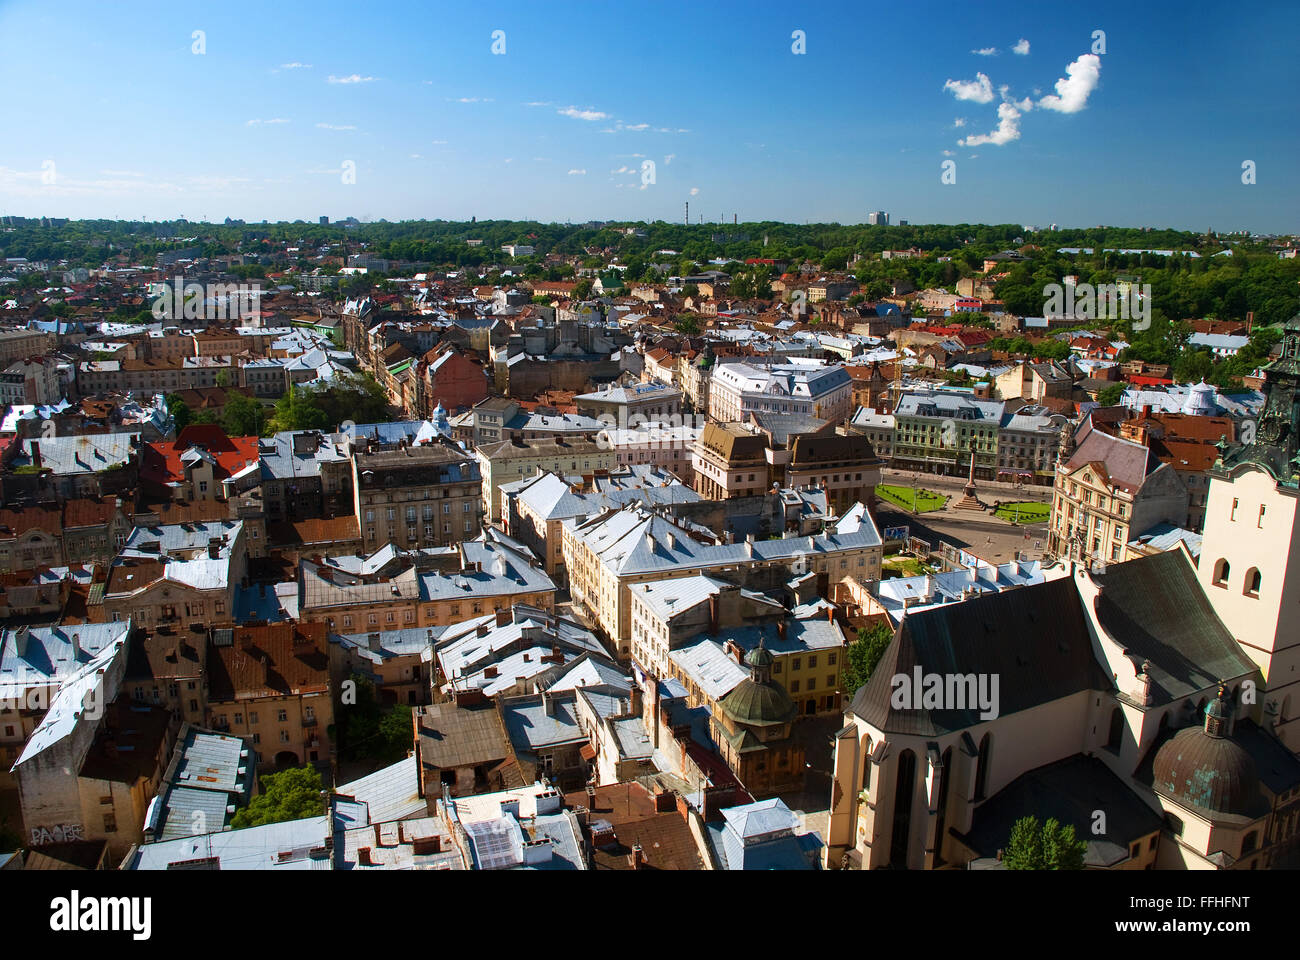 Lvov city view from height with buildings and people during the day Stock Photo